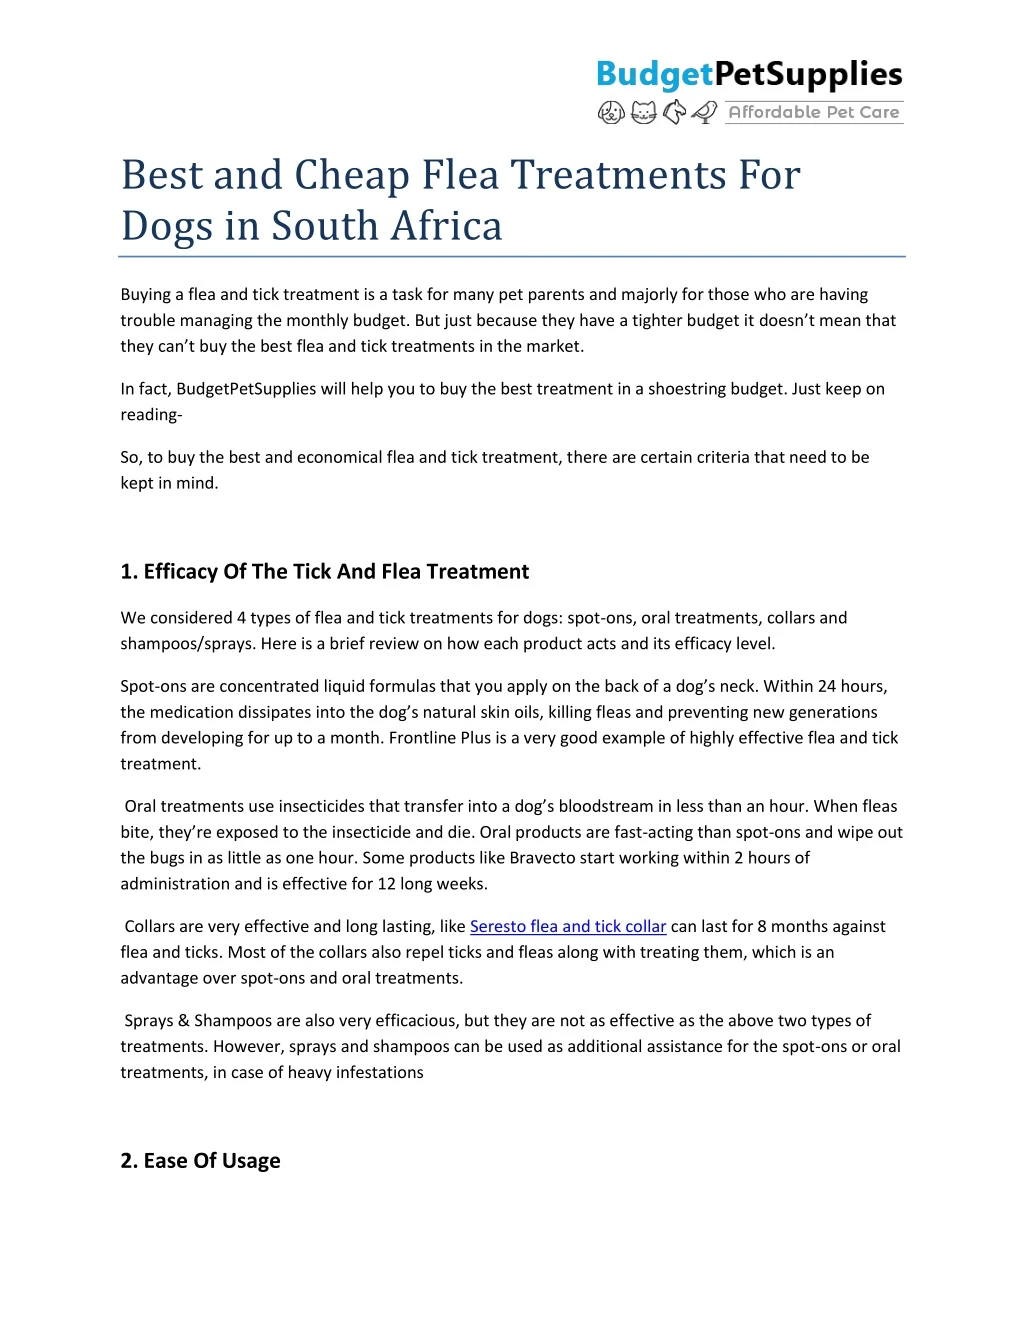 best and cheap flea treatments for dogs in south